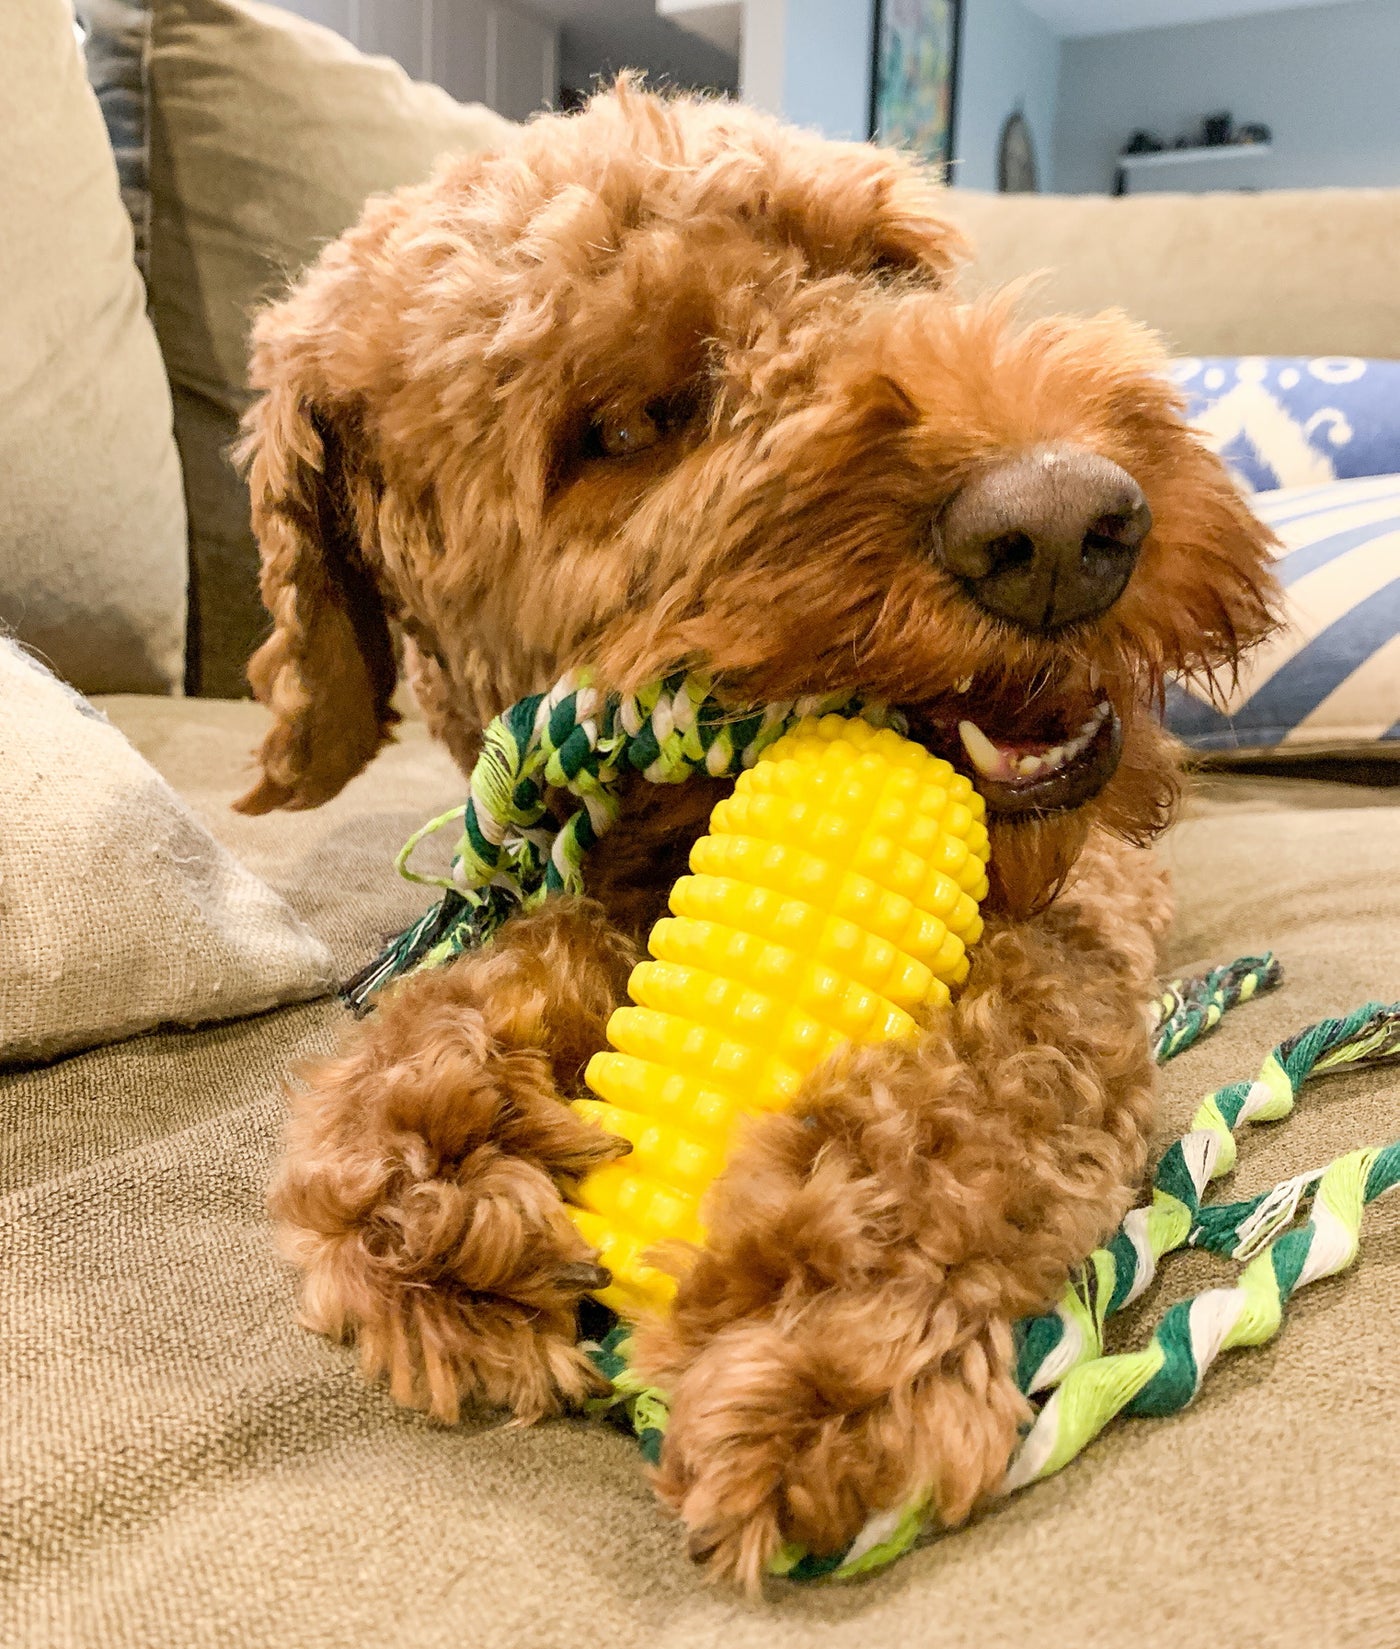 Labradoodle biting with Yellow rubber corn cob dog toy with green rope